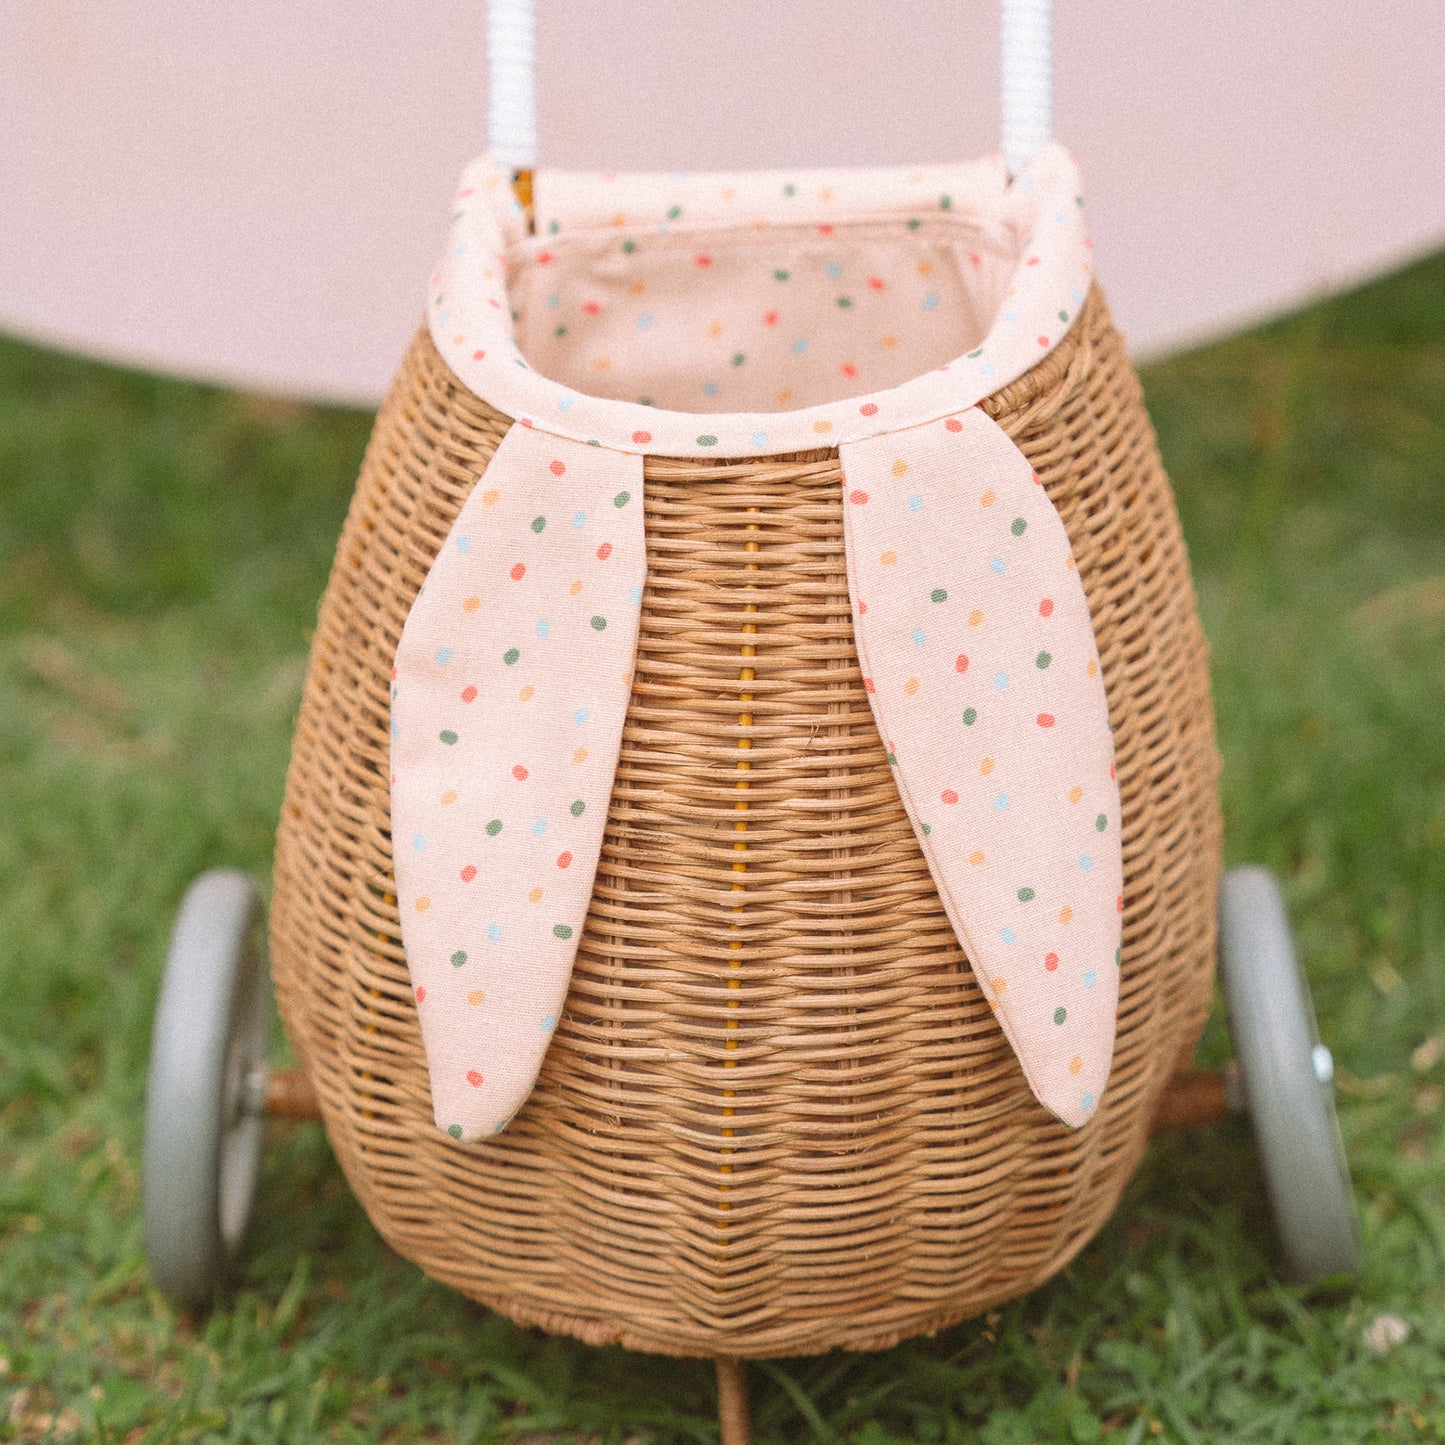 RATTAN BUNNY LUGGY WITH LINING
gumdrop